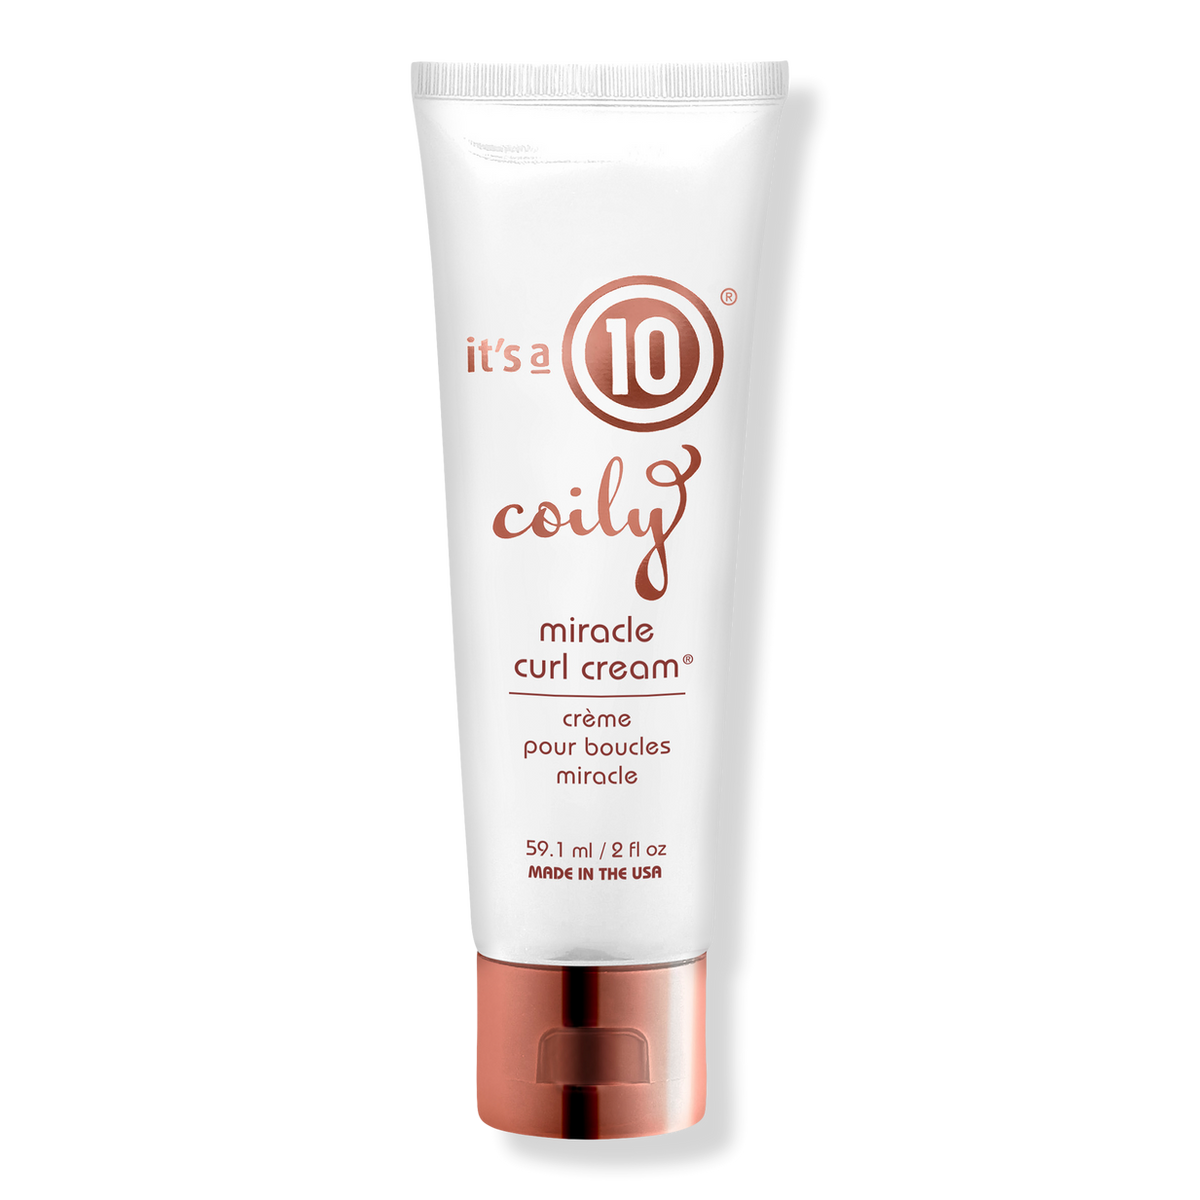 ITS a 1O COILY MIRACLE CURL CREAM 59ML